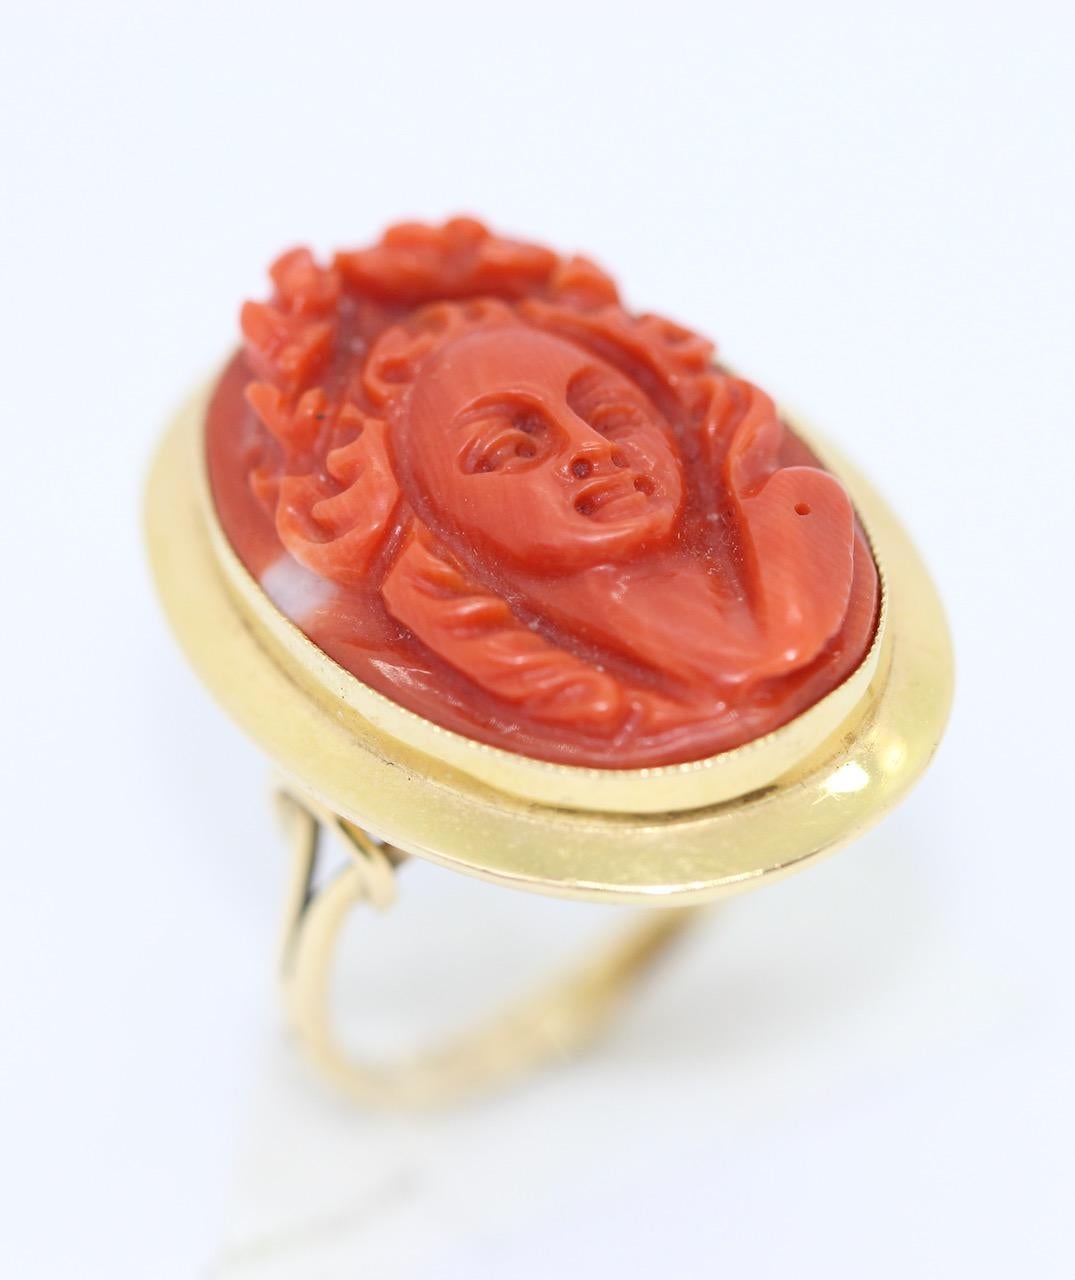 Antique Ring, coral cameo, 18k gold, female portrait

We also have the matching Brooch/Enhancer on offer.

Including certificate of authenticity.